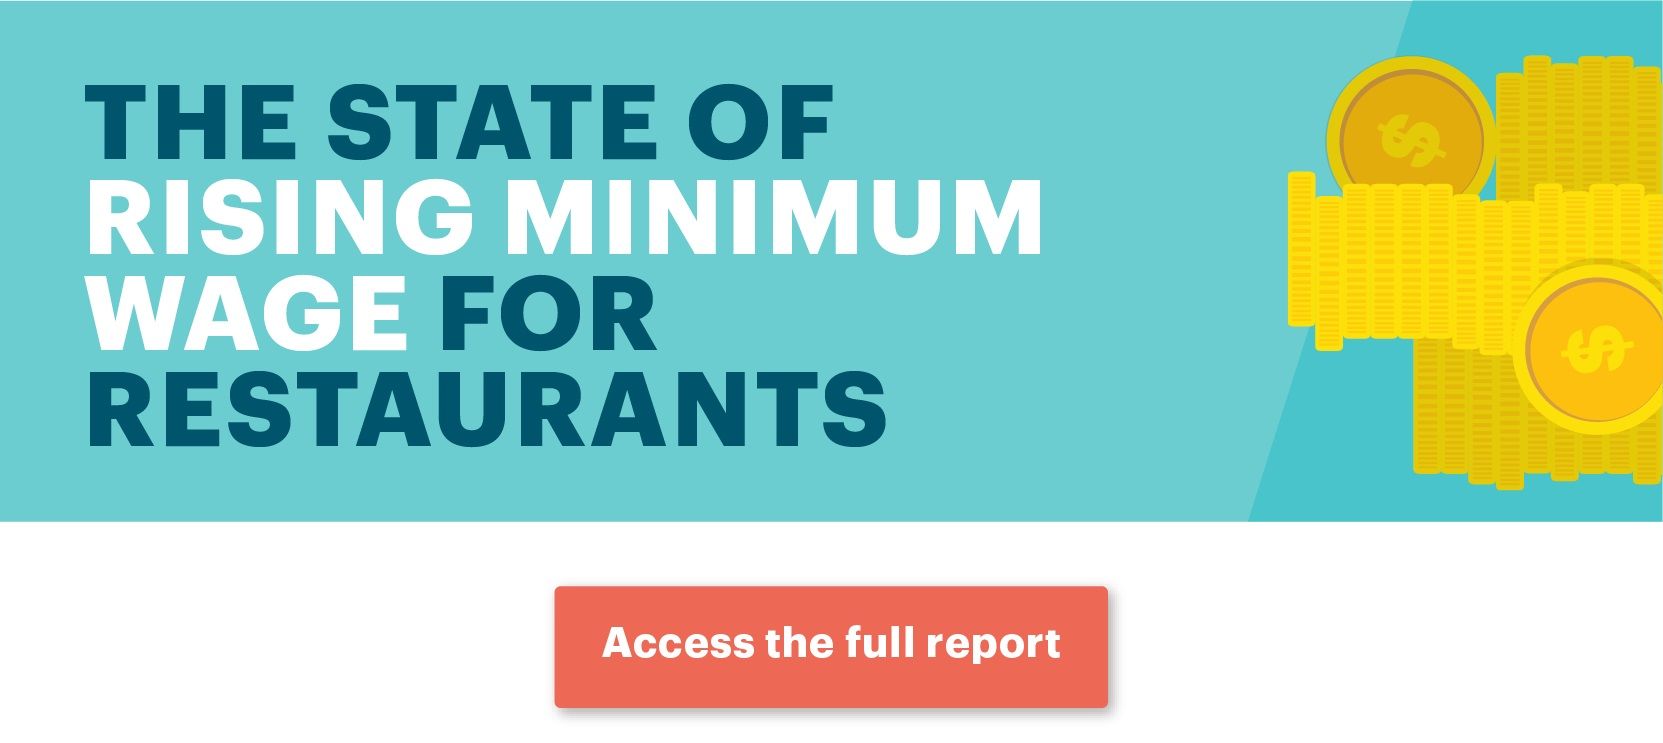 Restaurant Minimum Wage Increases What to Know for 2021